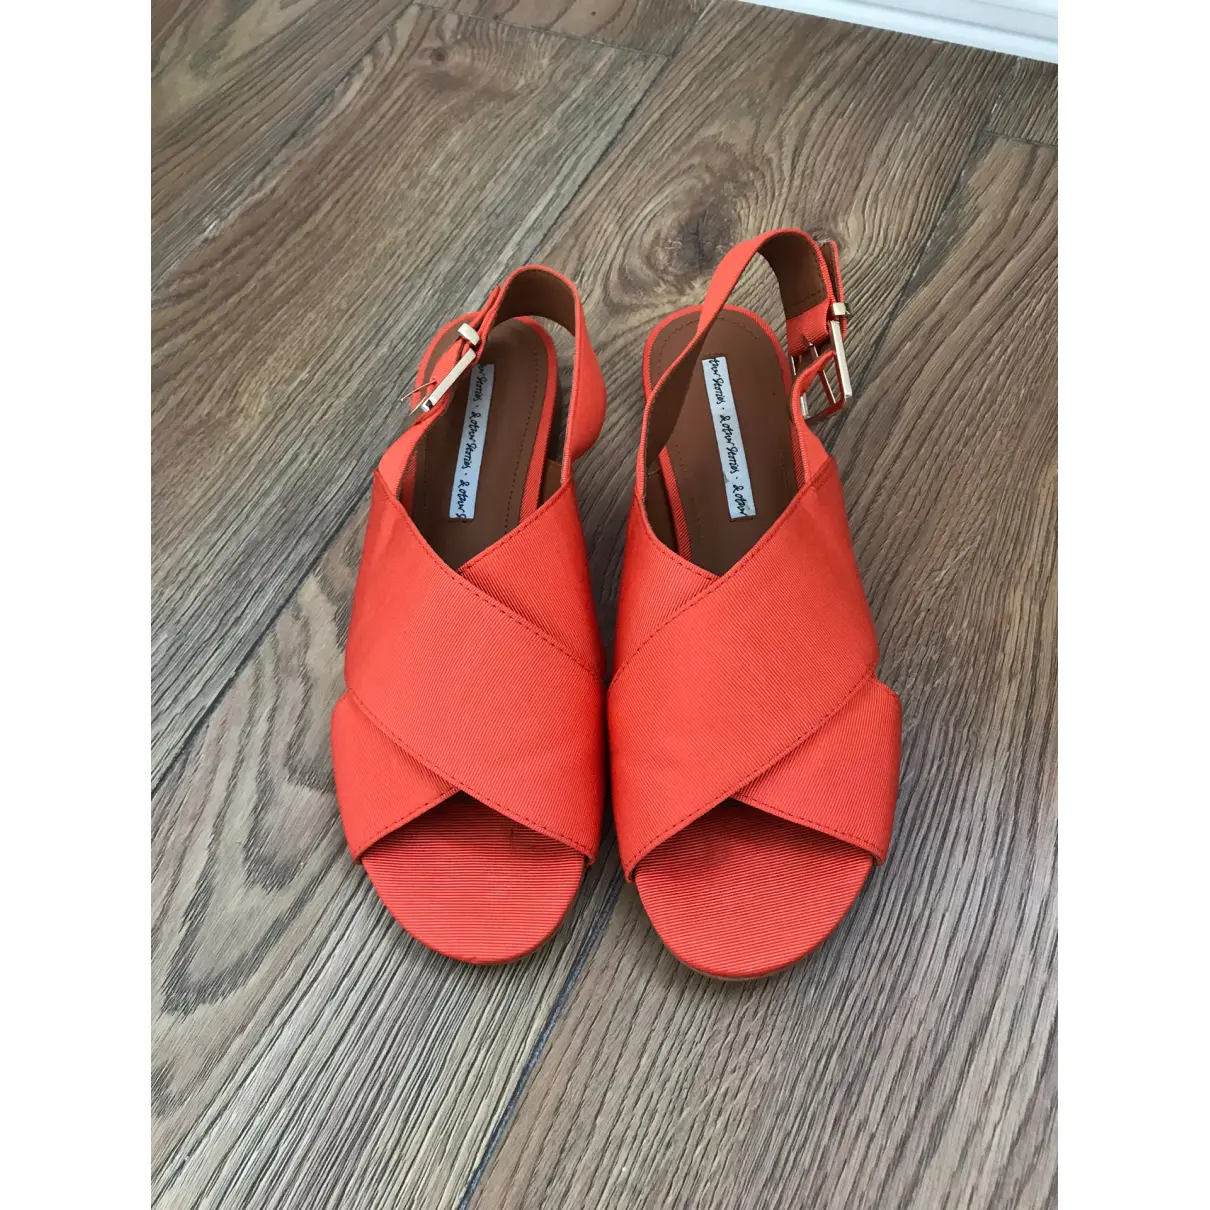 Buy & Other Stories Cloth sandal online